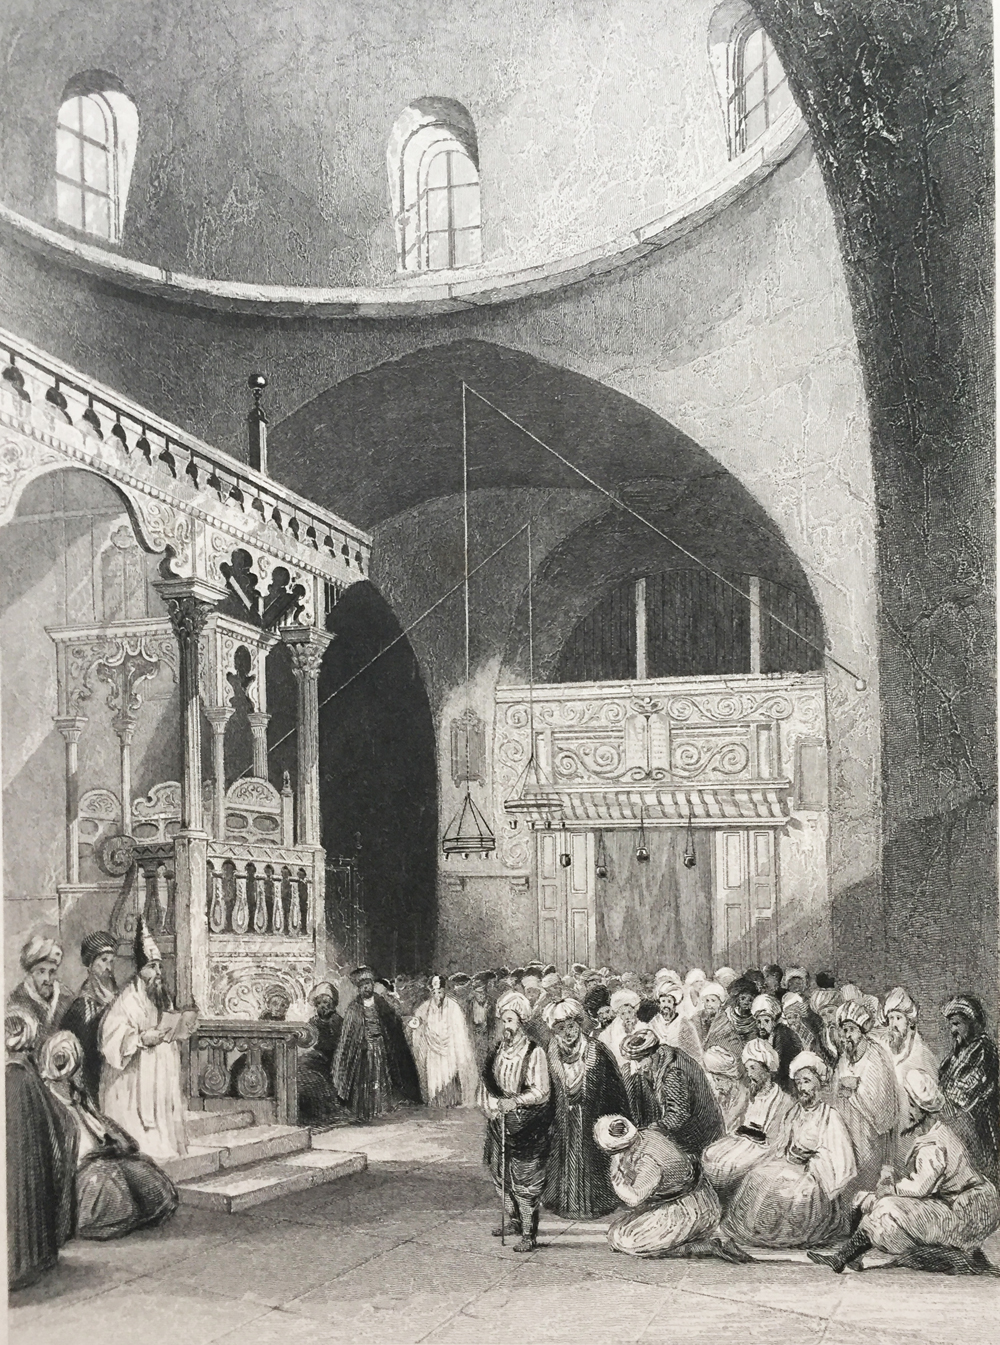 The Great Synagogue of the Jews in Jerusalem